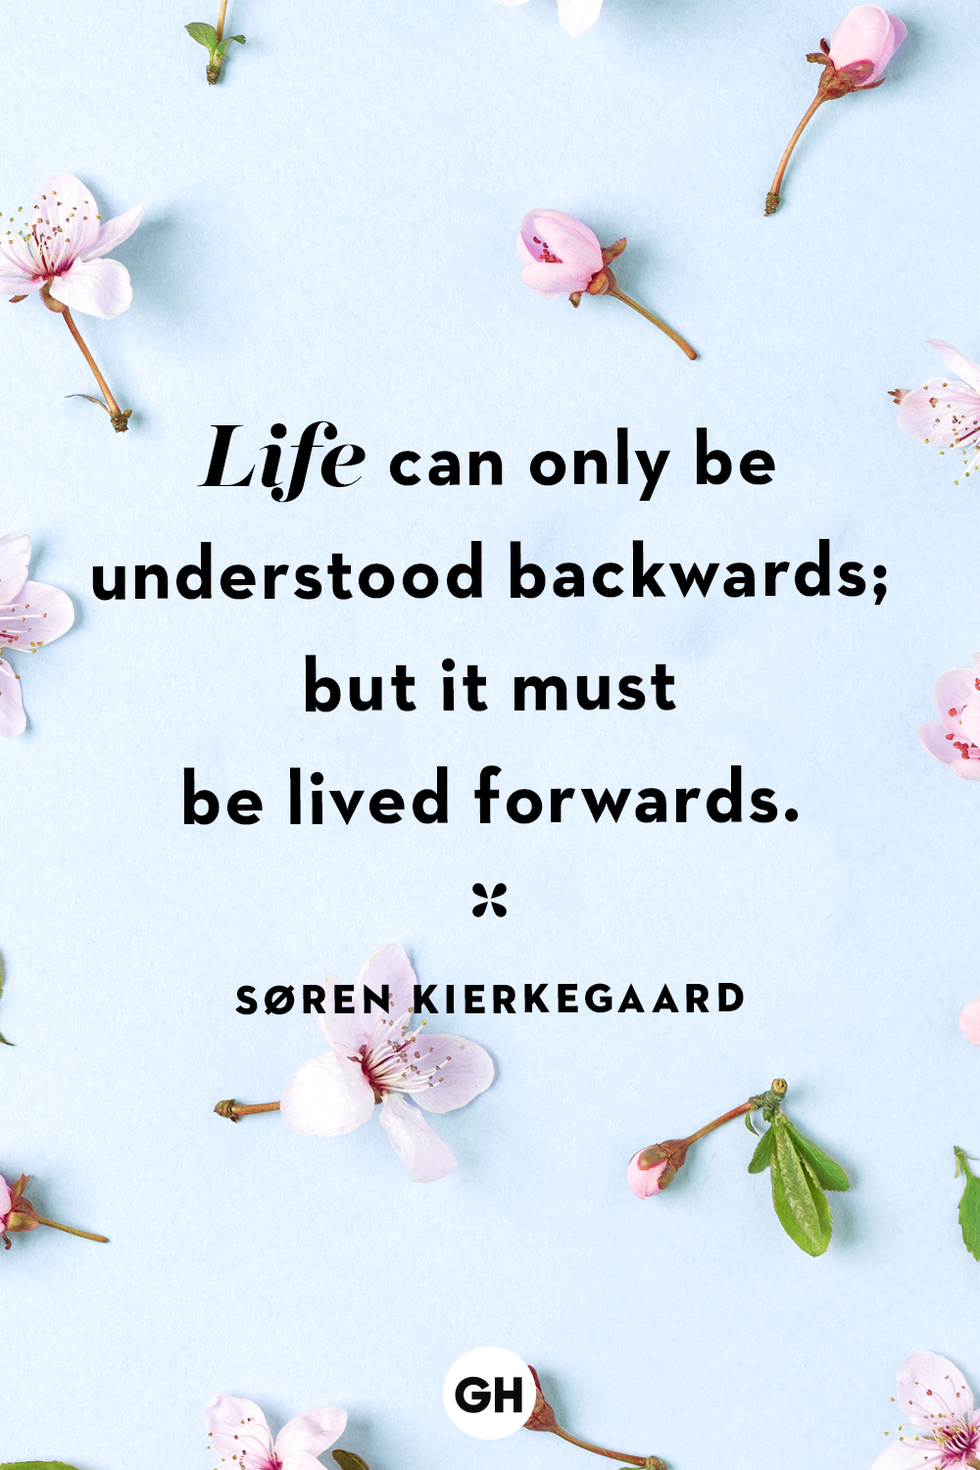 111 Best Quotes About Life — Life Quotes